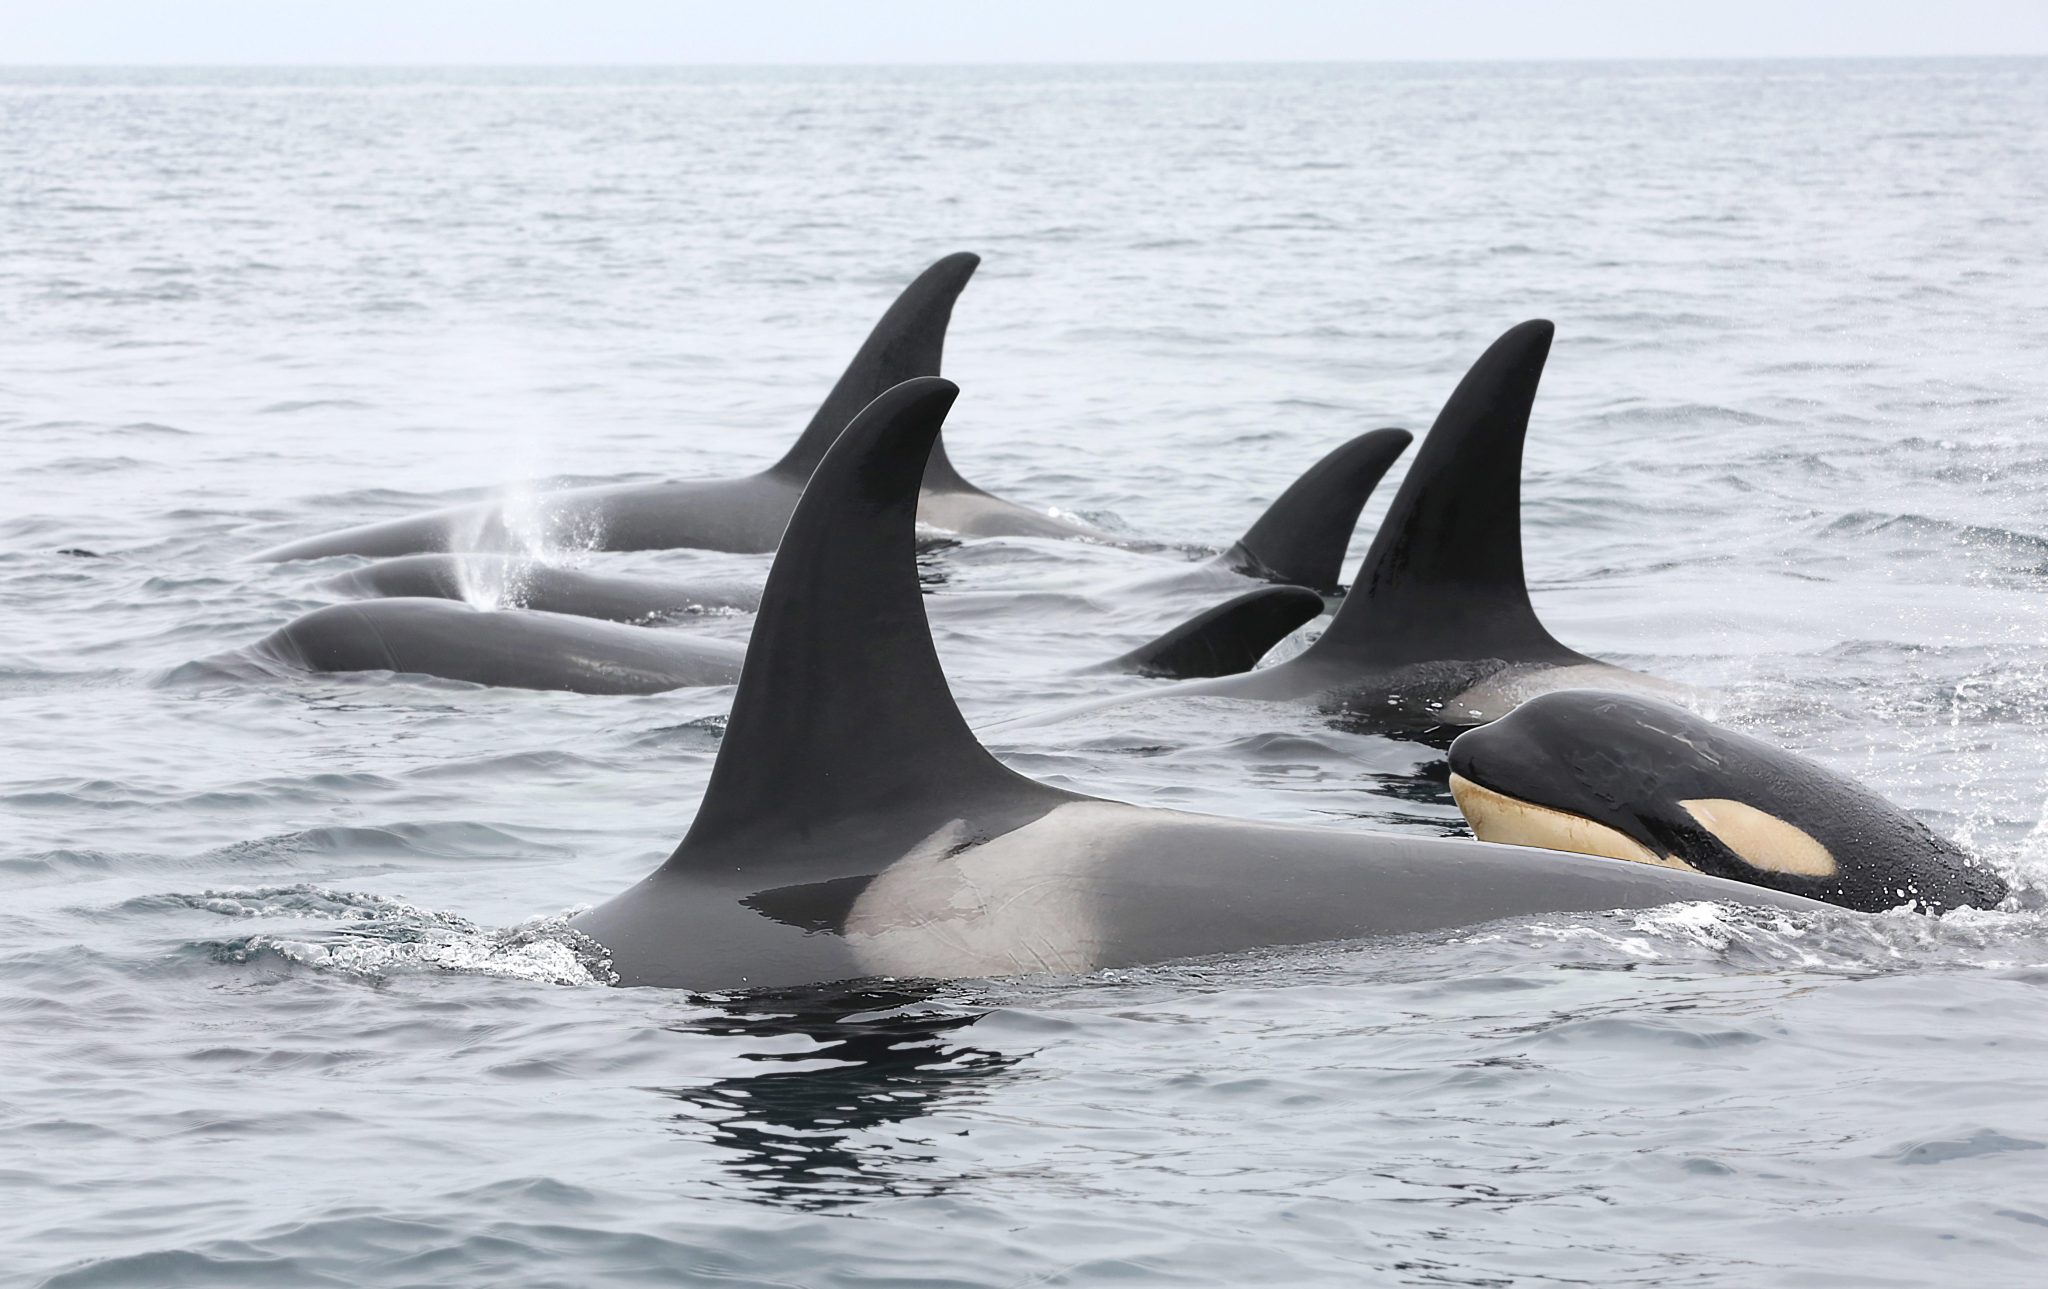 Group of killer whales in the North Pacific